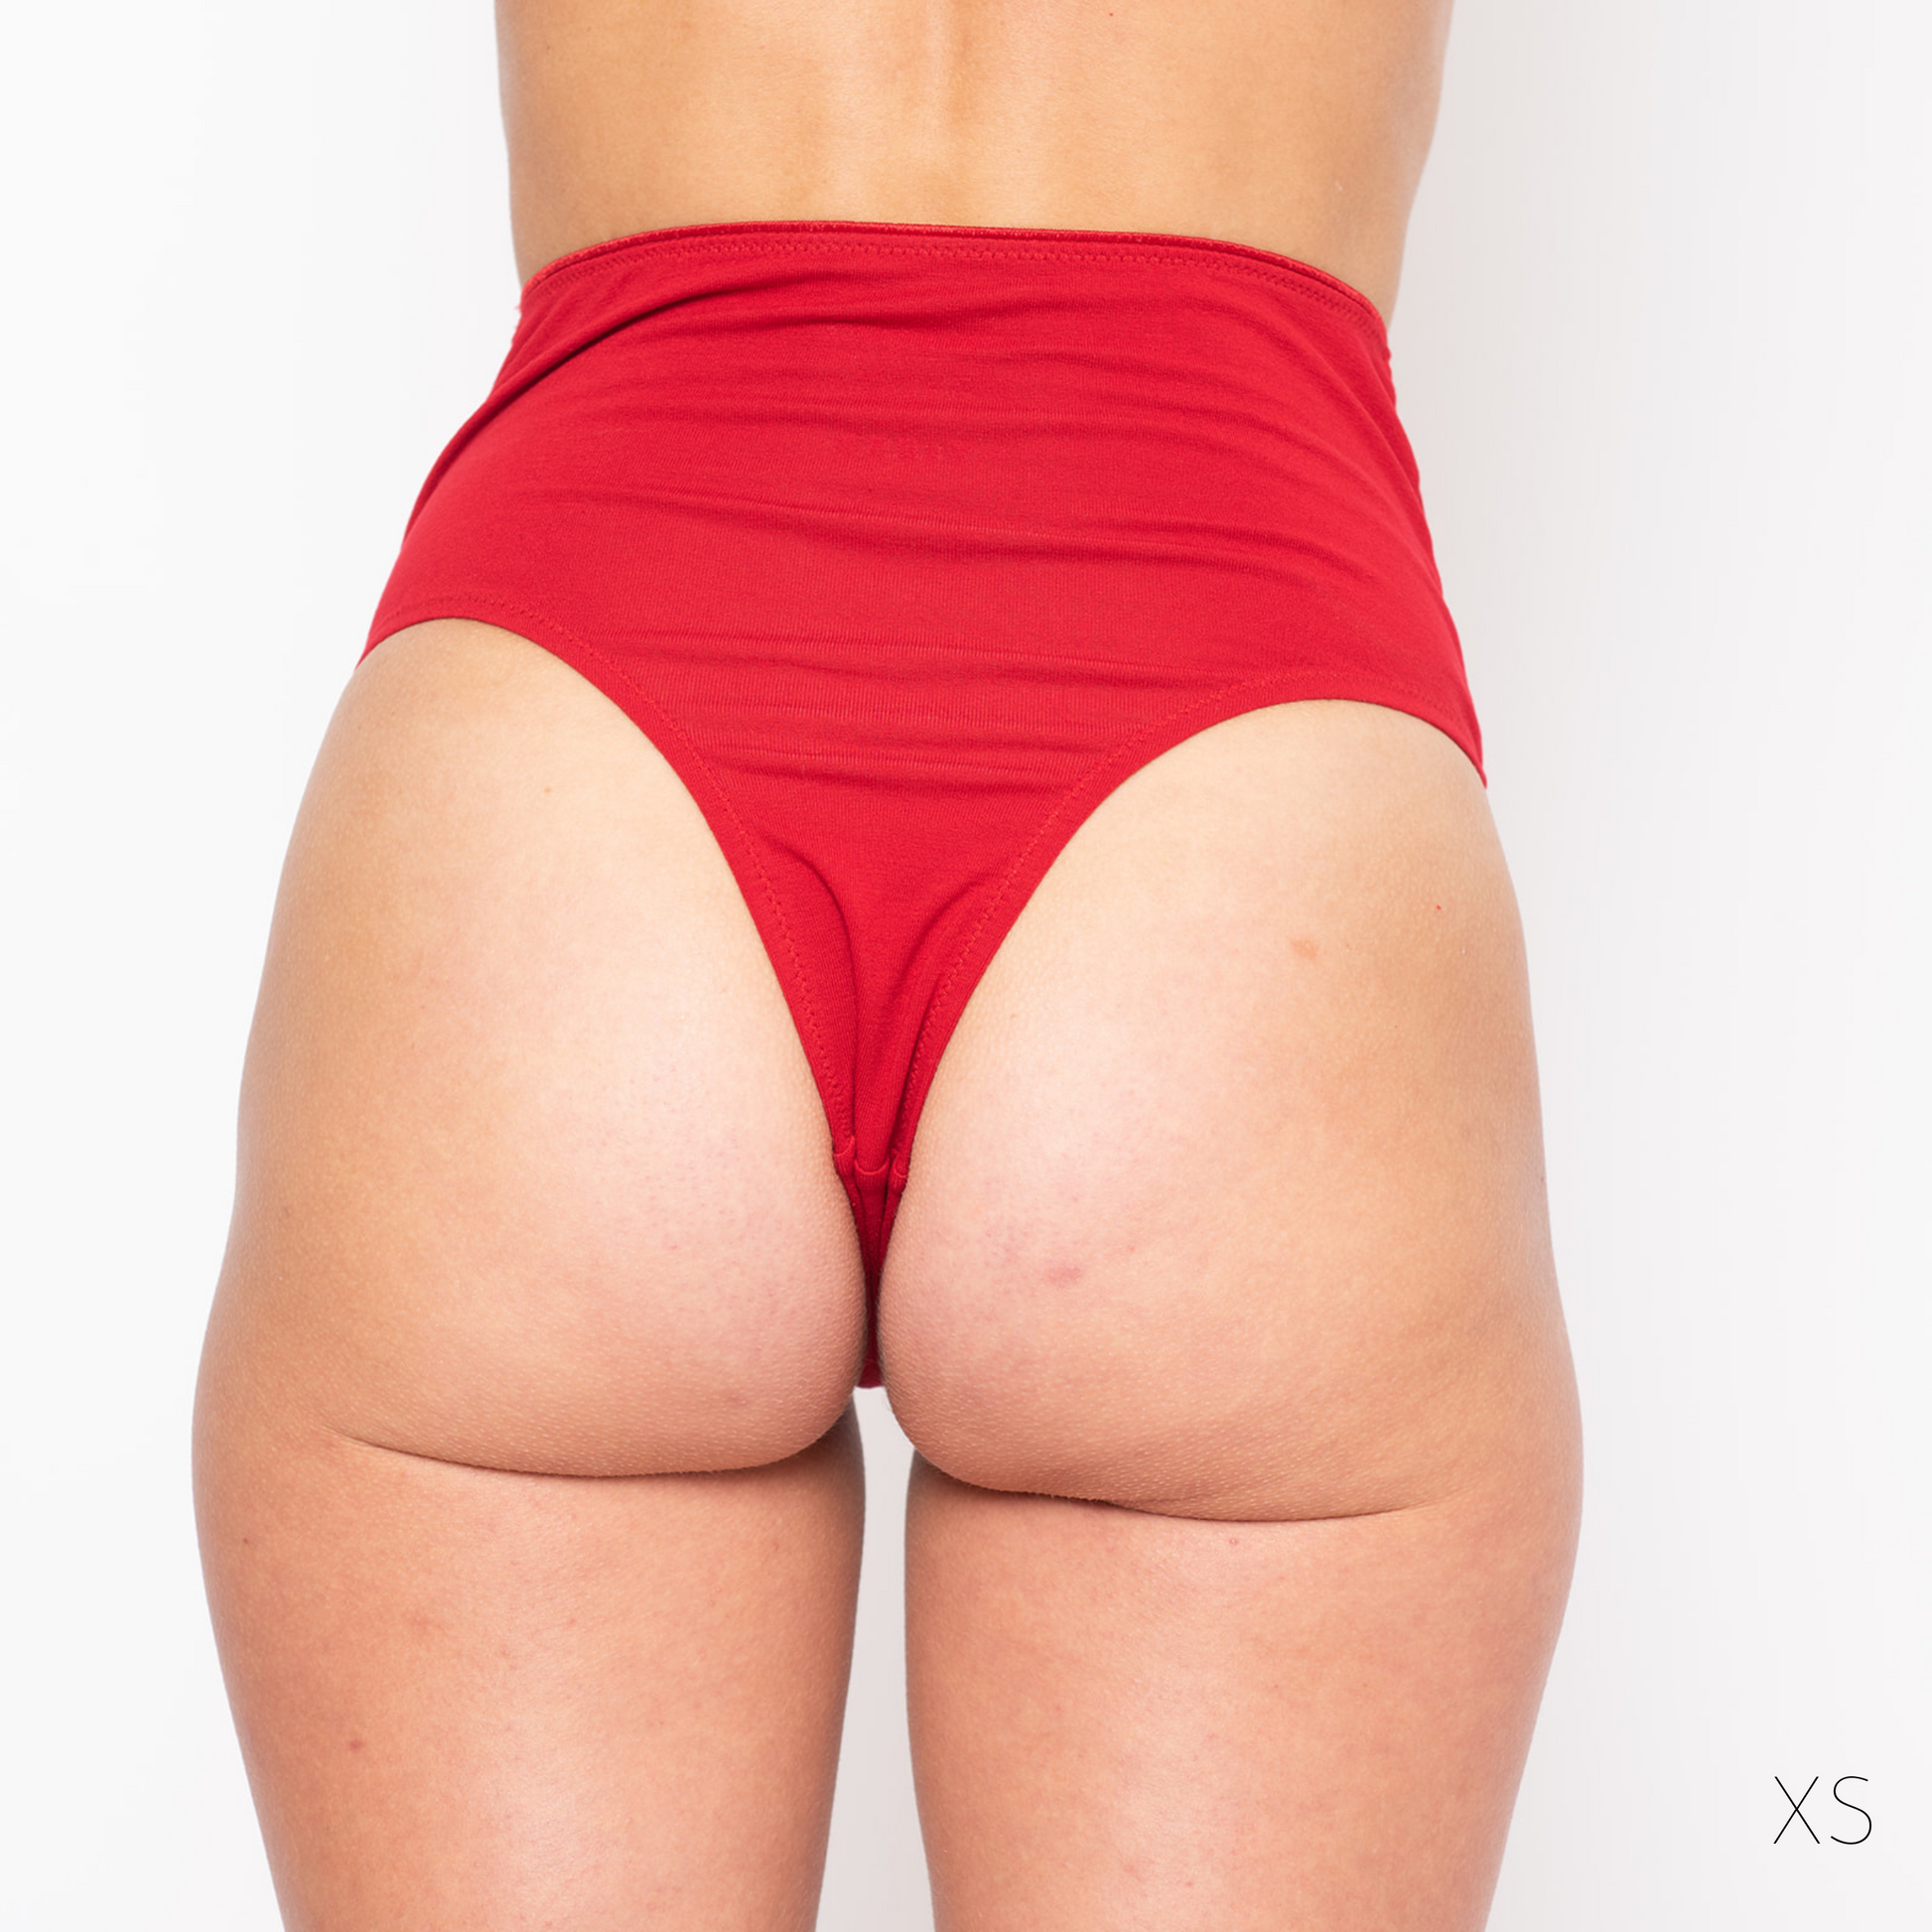 Lore Janssens Oh Yaz Red High Waisted String Oxygen Collection breathable underwear comfortable Red high waist hi waist string thong healthy underwear cotton ecovero vaginal irritation ohyaz